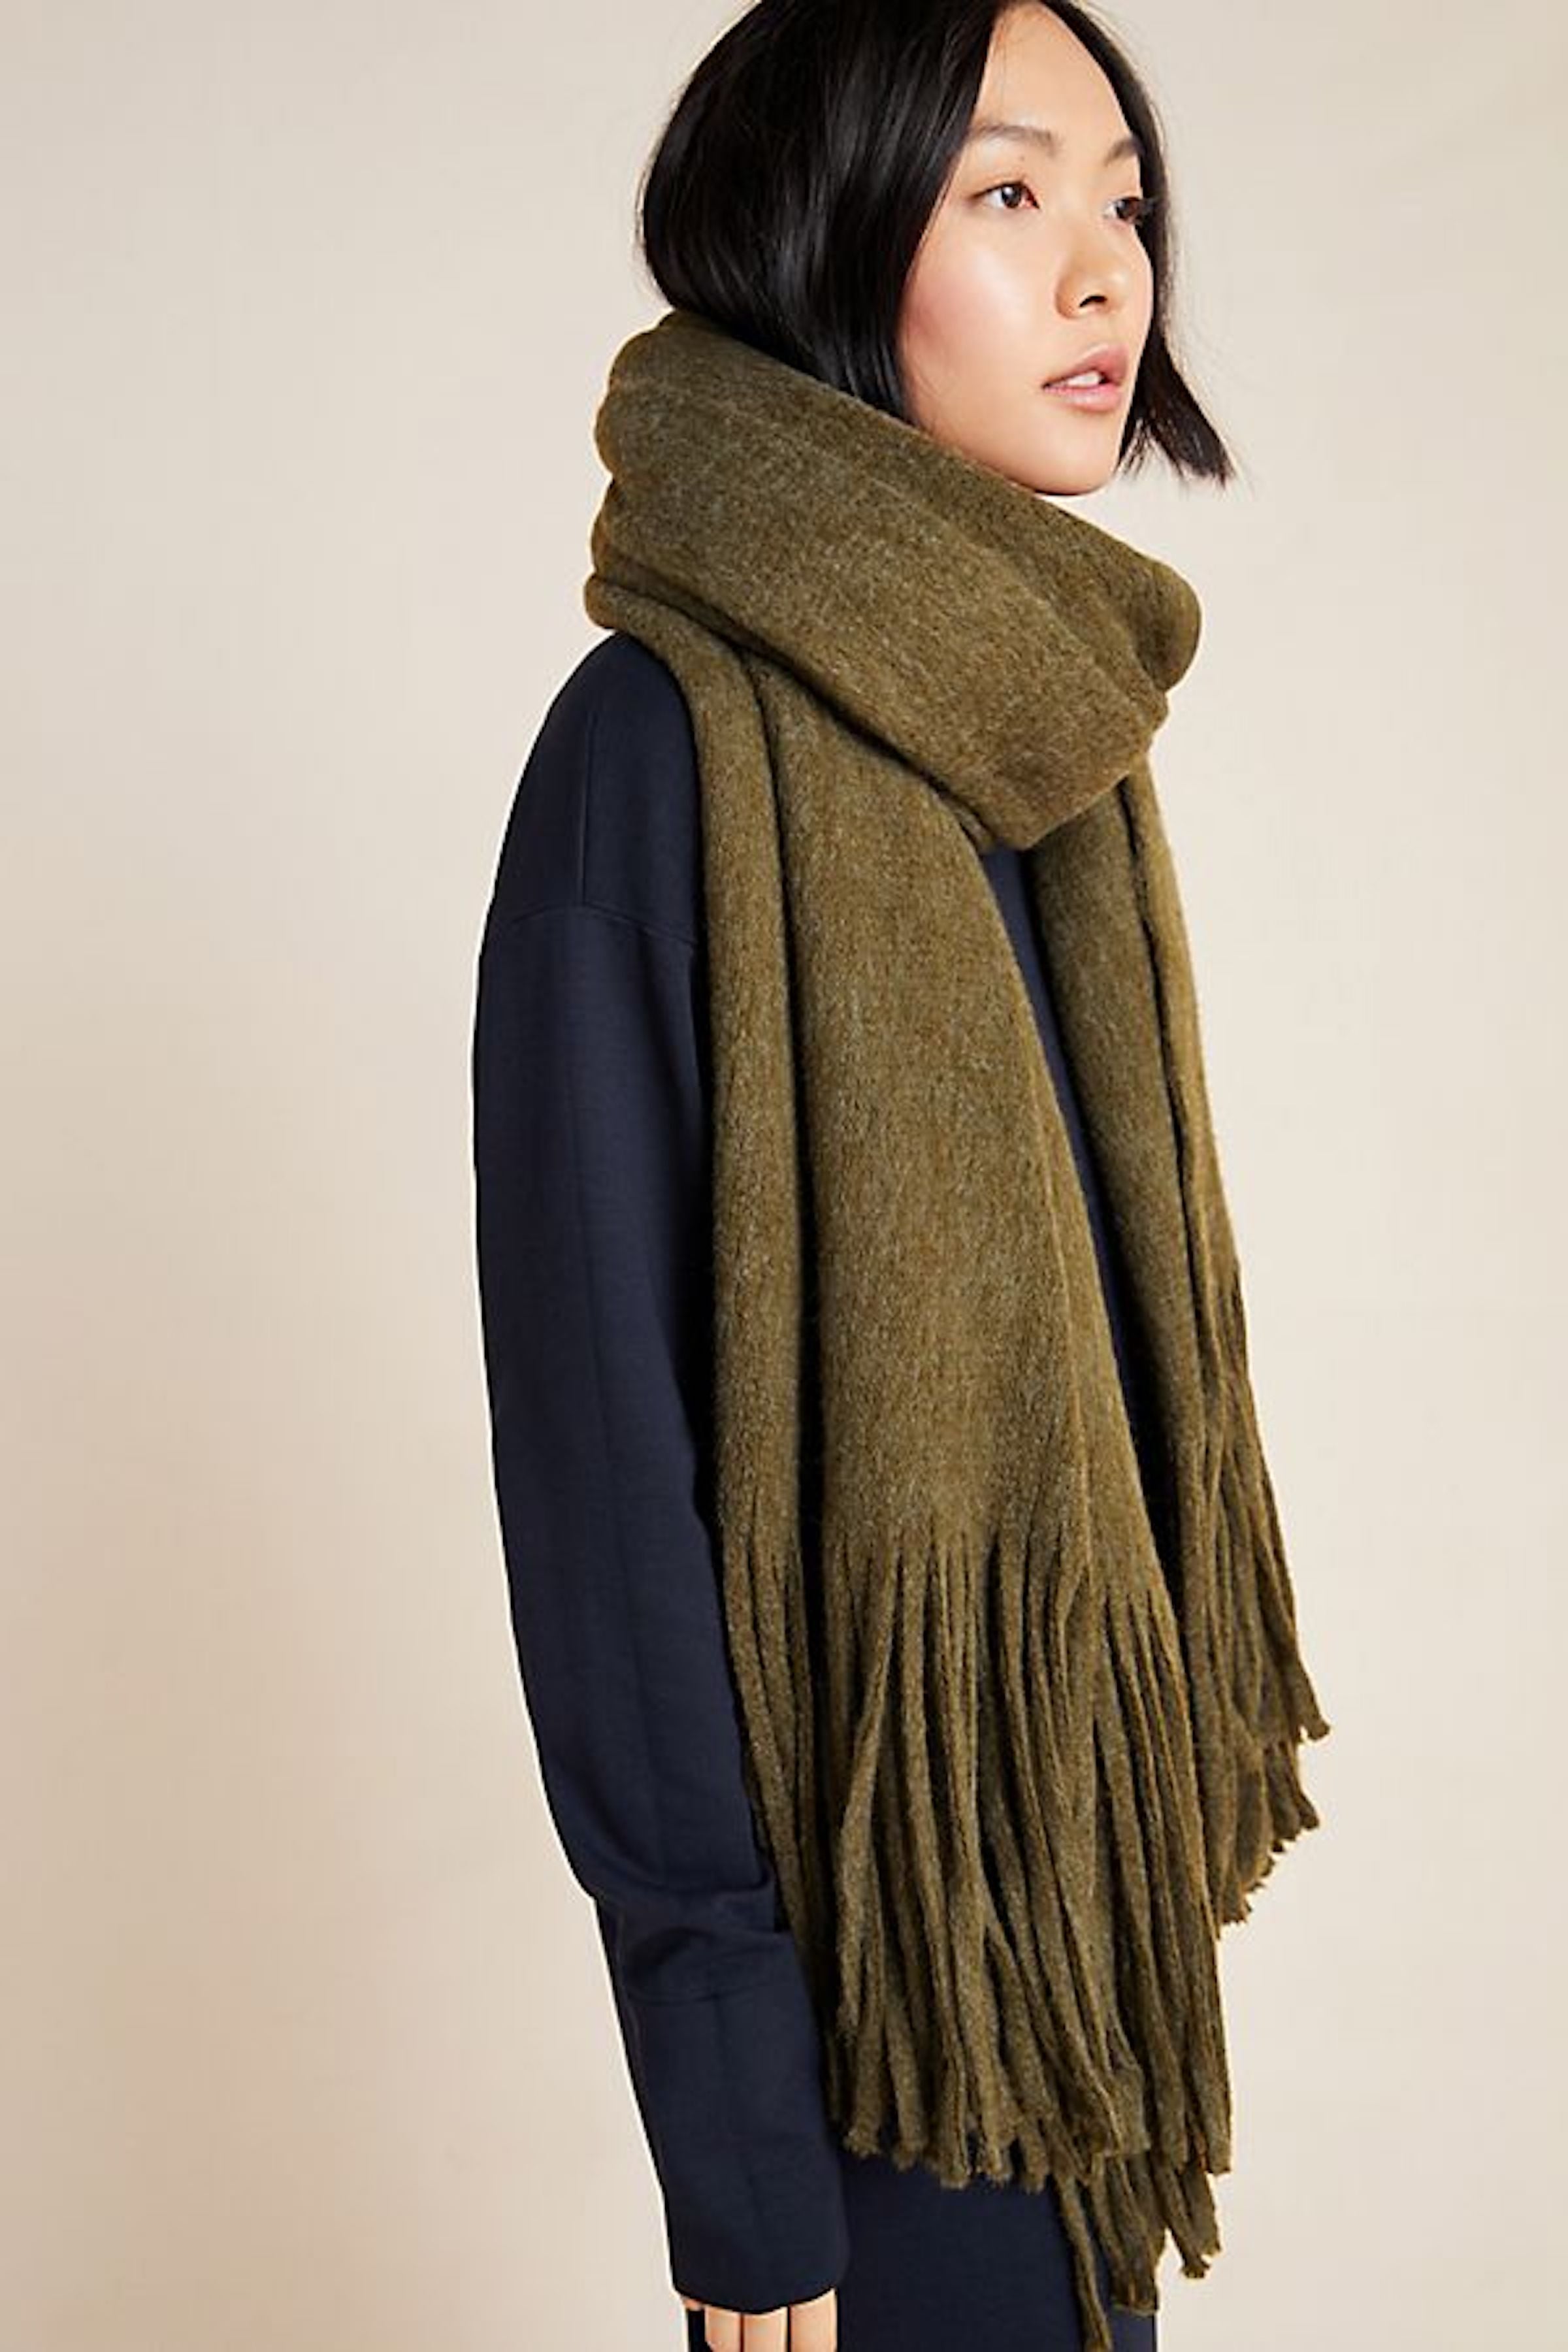 Cozy Onesies, Blanket Scarves and More for the Winter Chill - The